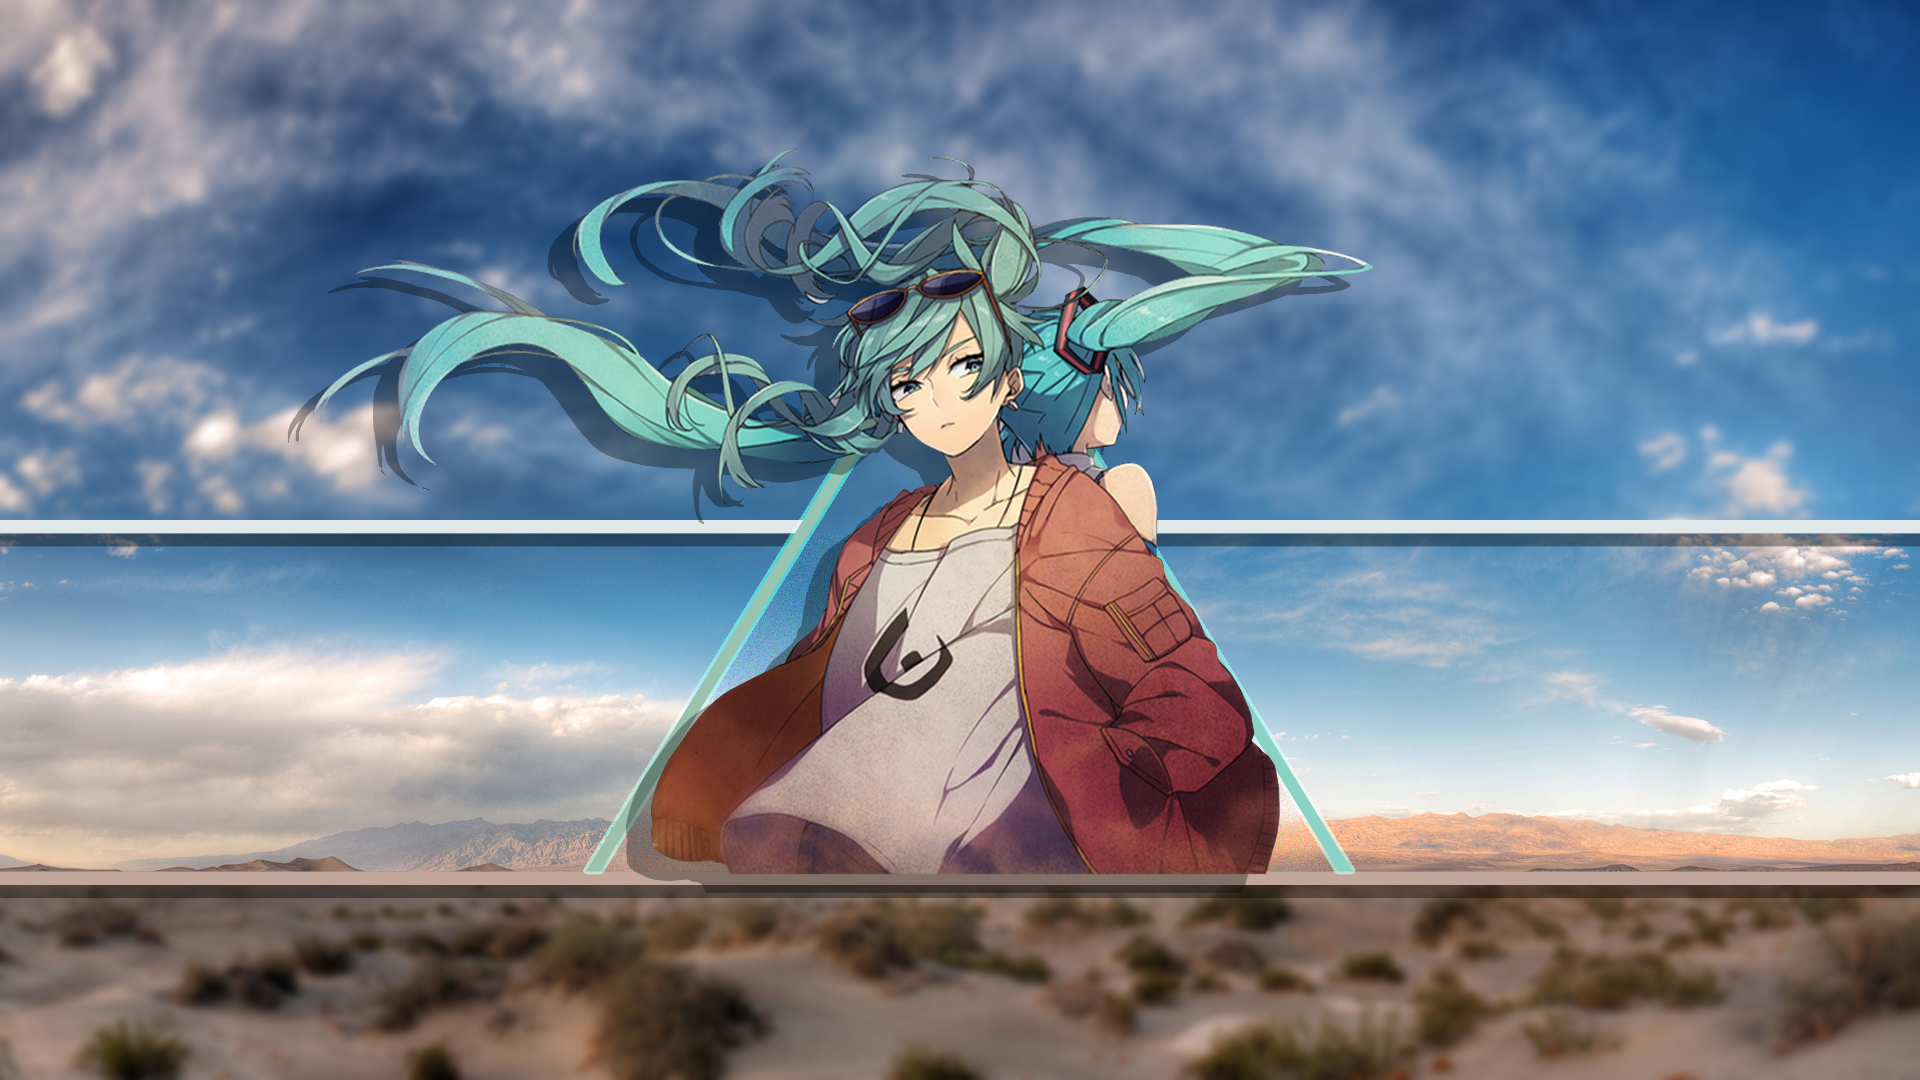 Anime 1920x1080 picture-in-picture anime girls Hatsune Miku desert sky clouds twintails sunglasses Vocaloid long hair